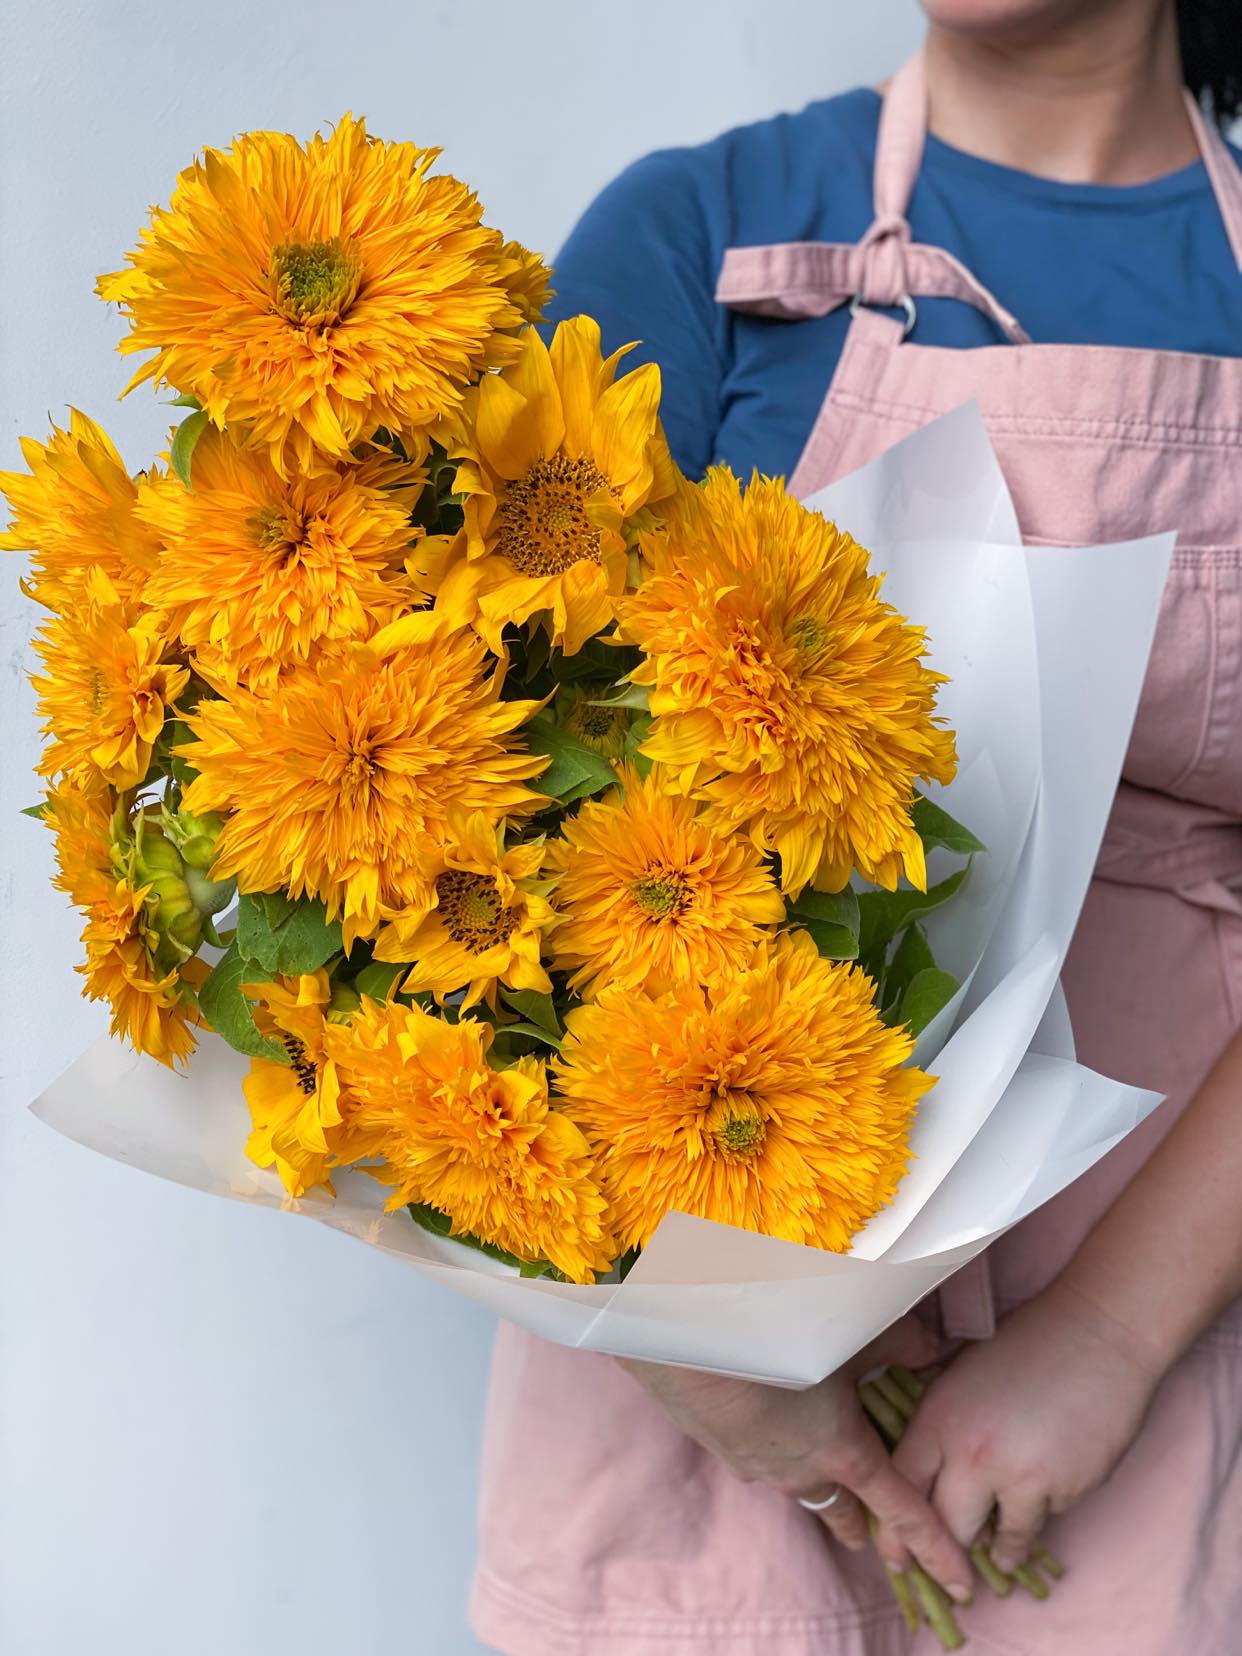 Bouquet of beatiful sunflowers | Featured Image for The Power of Flowers blog on Poco Posy.